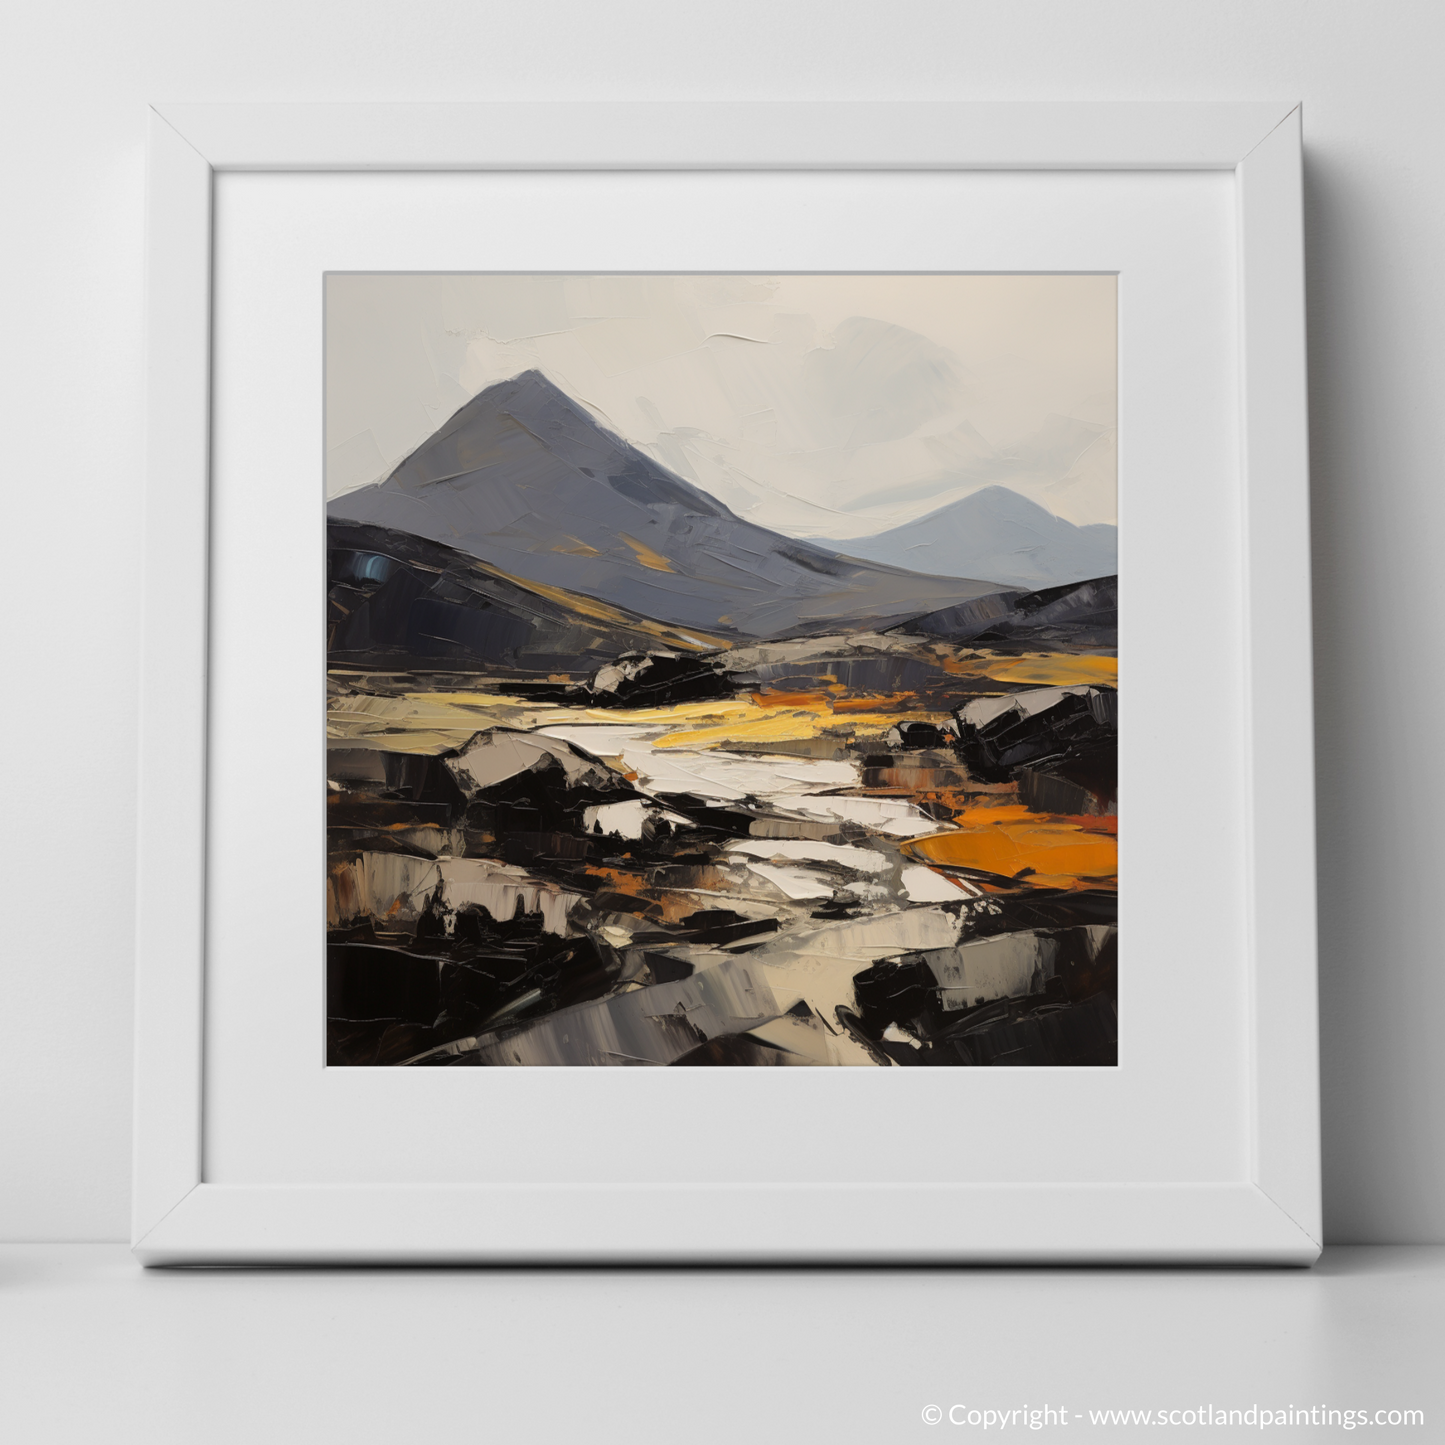 Art Print of Ben More, Isle of Mull with a white frame